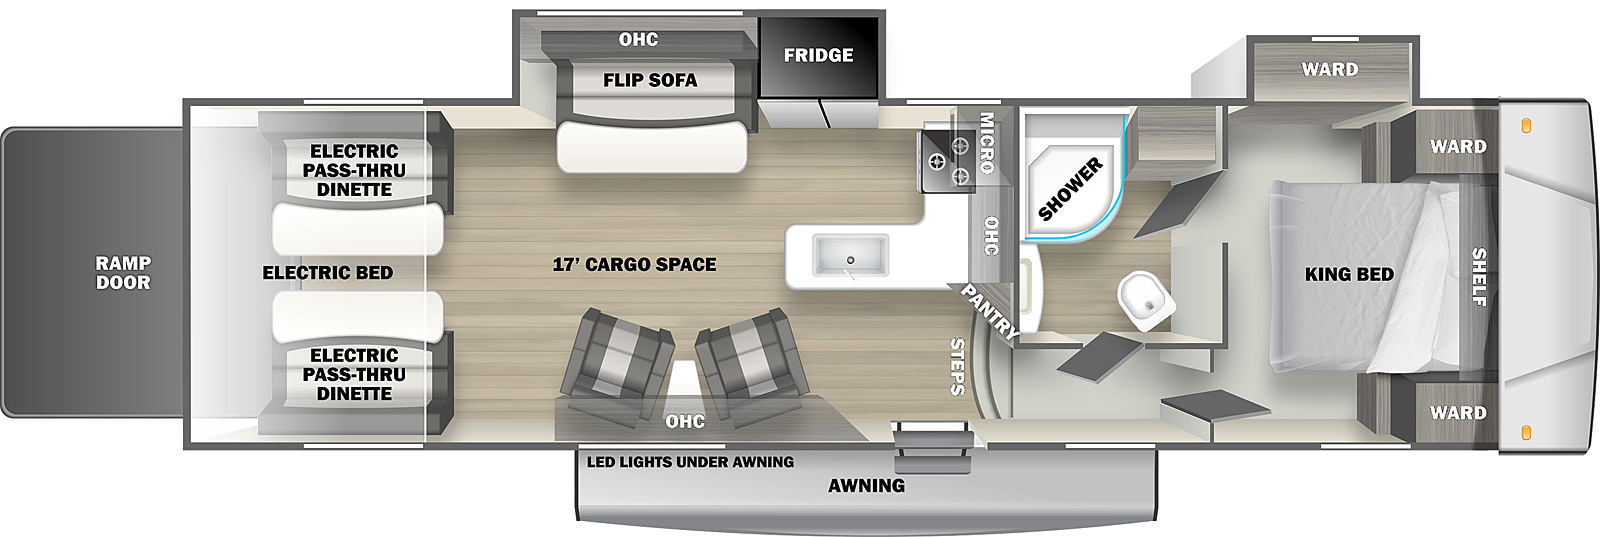 The Shockwave 32FWGDX is a toy hauler fifth wheel with one entry door, a rear ramp door, two slides on the off-door side, and 18' awning on the exterior. Inside, a walkaround king bed is located in the front of the unit, with wardrobe cabinets on either side, cabinets above the head of the bed, and a wardrobe vanity in a slideout on the off-door bedroom wall. There are two doors in the bedroom, one leading into the bathroom and one opening to a short hallway with steps leading into the main living area. The bathroom contains a sink, medicine cabinet, commode, linen cabinet, and radius glass shower. The kitchen area is located on the opposite side of the bathroom wall, which faces the rear of the unit. There is an L-shaped countertop with a sink, stovetop and oven, with cabinets and a microwave oven mounted overhead. Next to the kitchen area on the off-door wall is a slideout containing a double door refrigerator and flip sofa with half dinette table and overhead cabinets. Across from the slideout on the door side are additional overhead cabinets and a pair of upholstered chairs with small table between them. In the rear of the unit are two flip sofa benches, one on either side, with a split dinette table between them. These convert to a standard electric bed. This trailer provides 17' of interior cargo space.